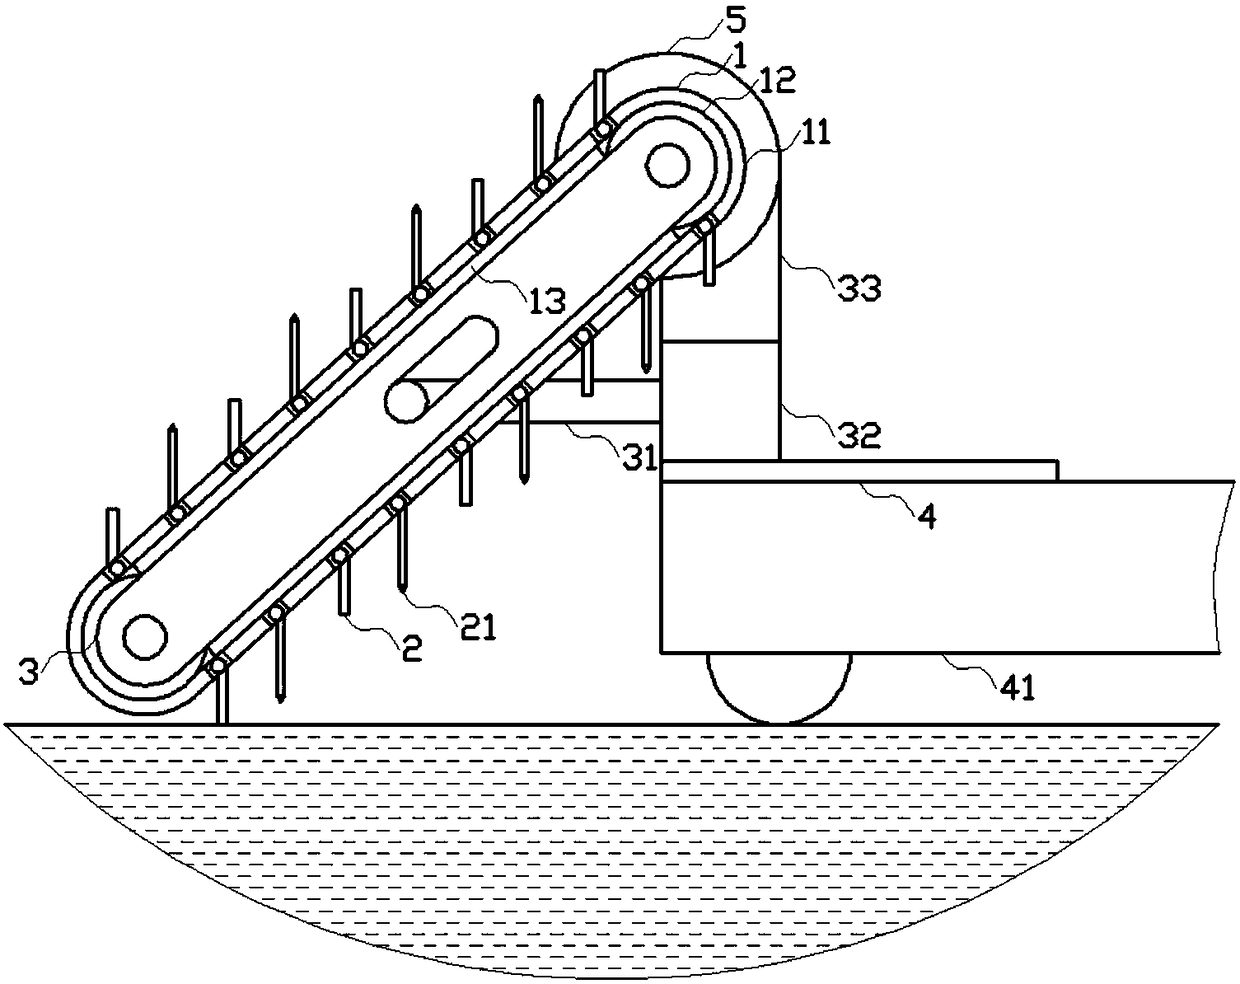 Automatic pit-digging soil-discharging apparatus for forest trees